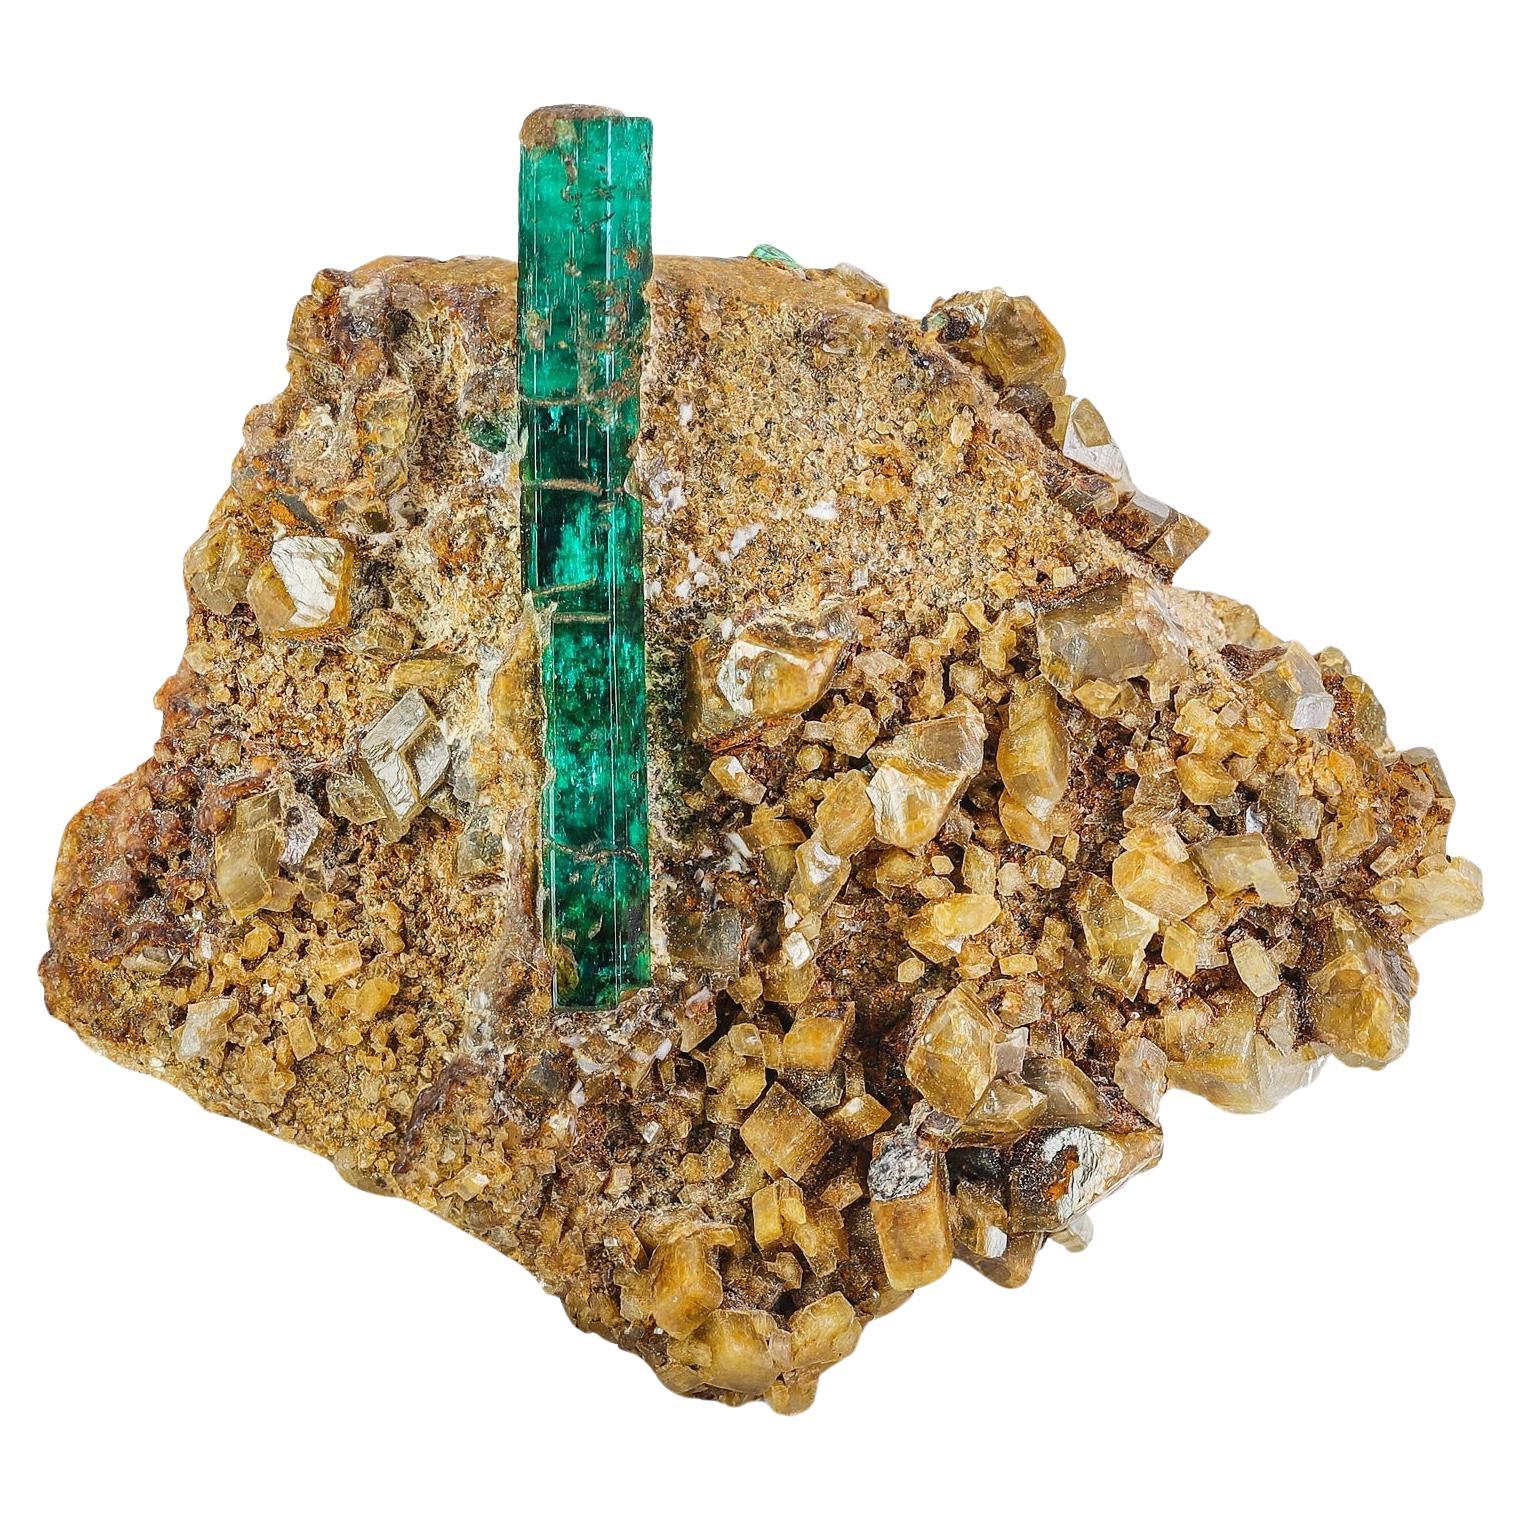 Aesthetic Specimen Of Free Standing Emerald Crystal On Calcite From Afghanistan